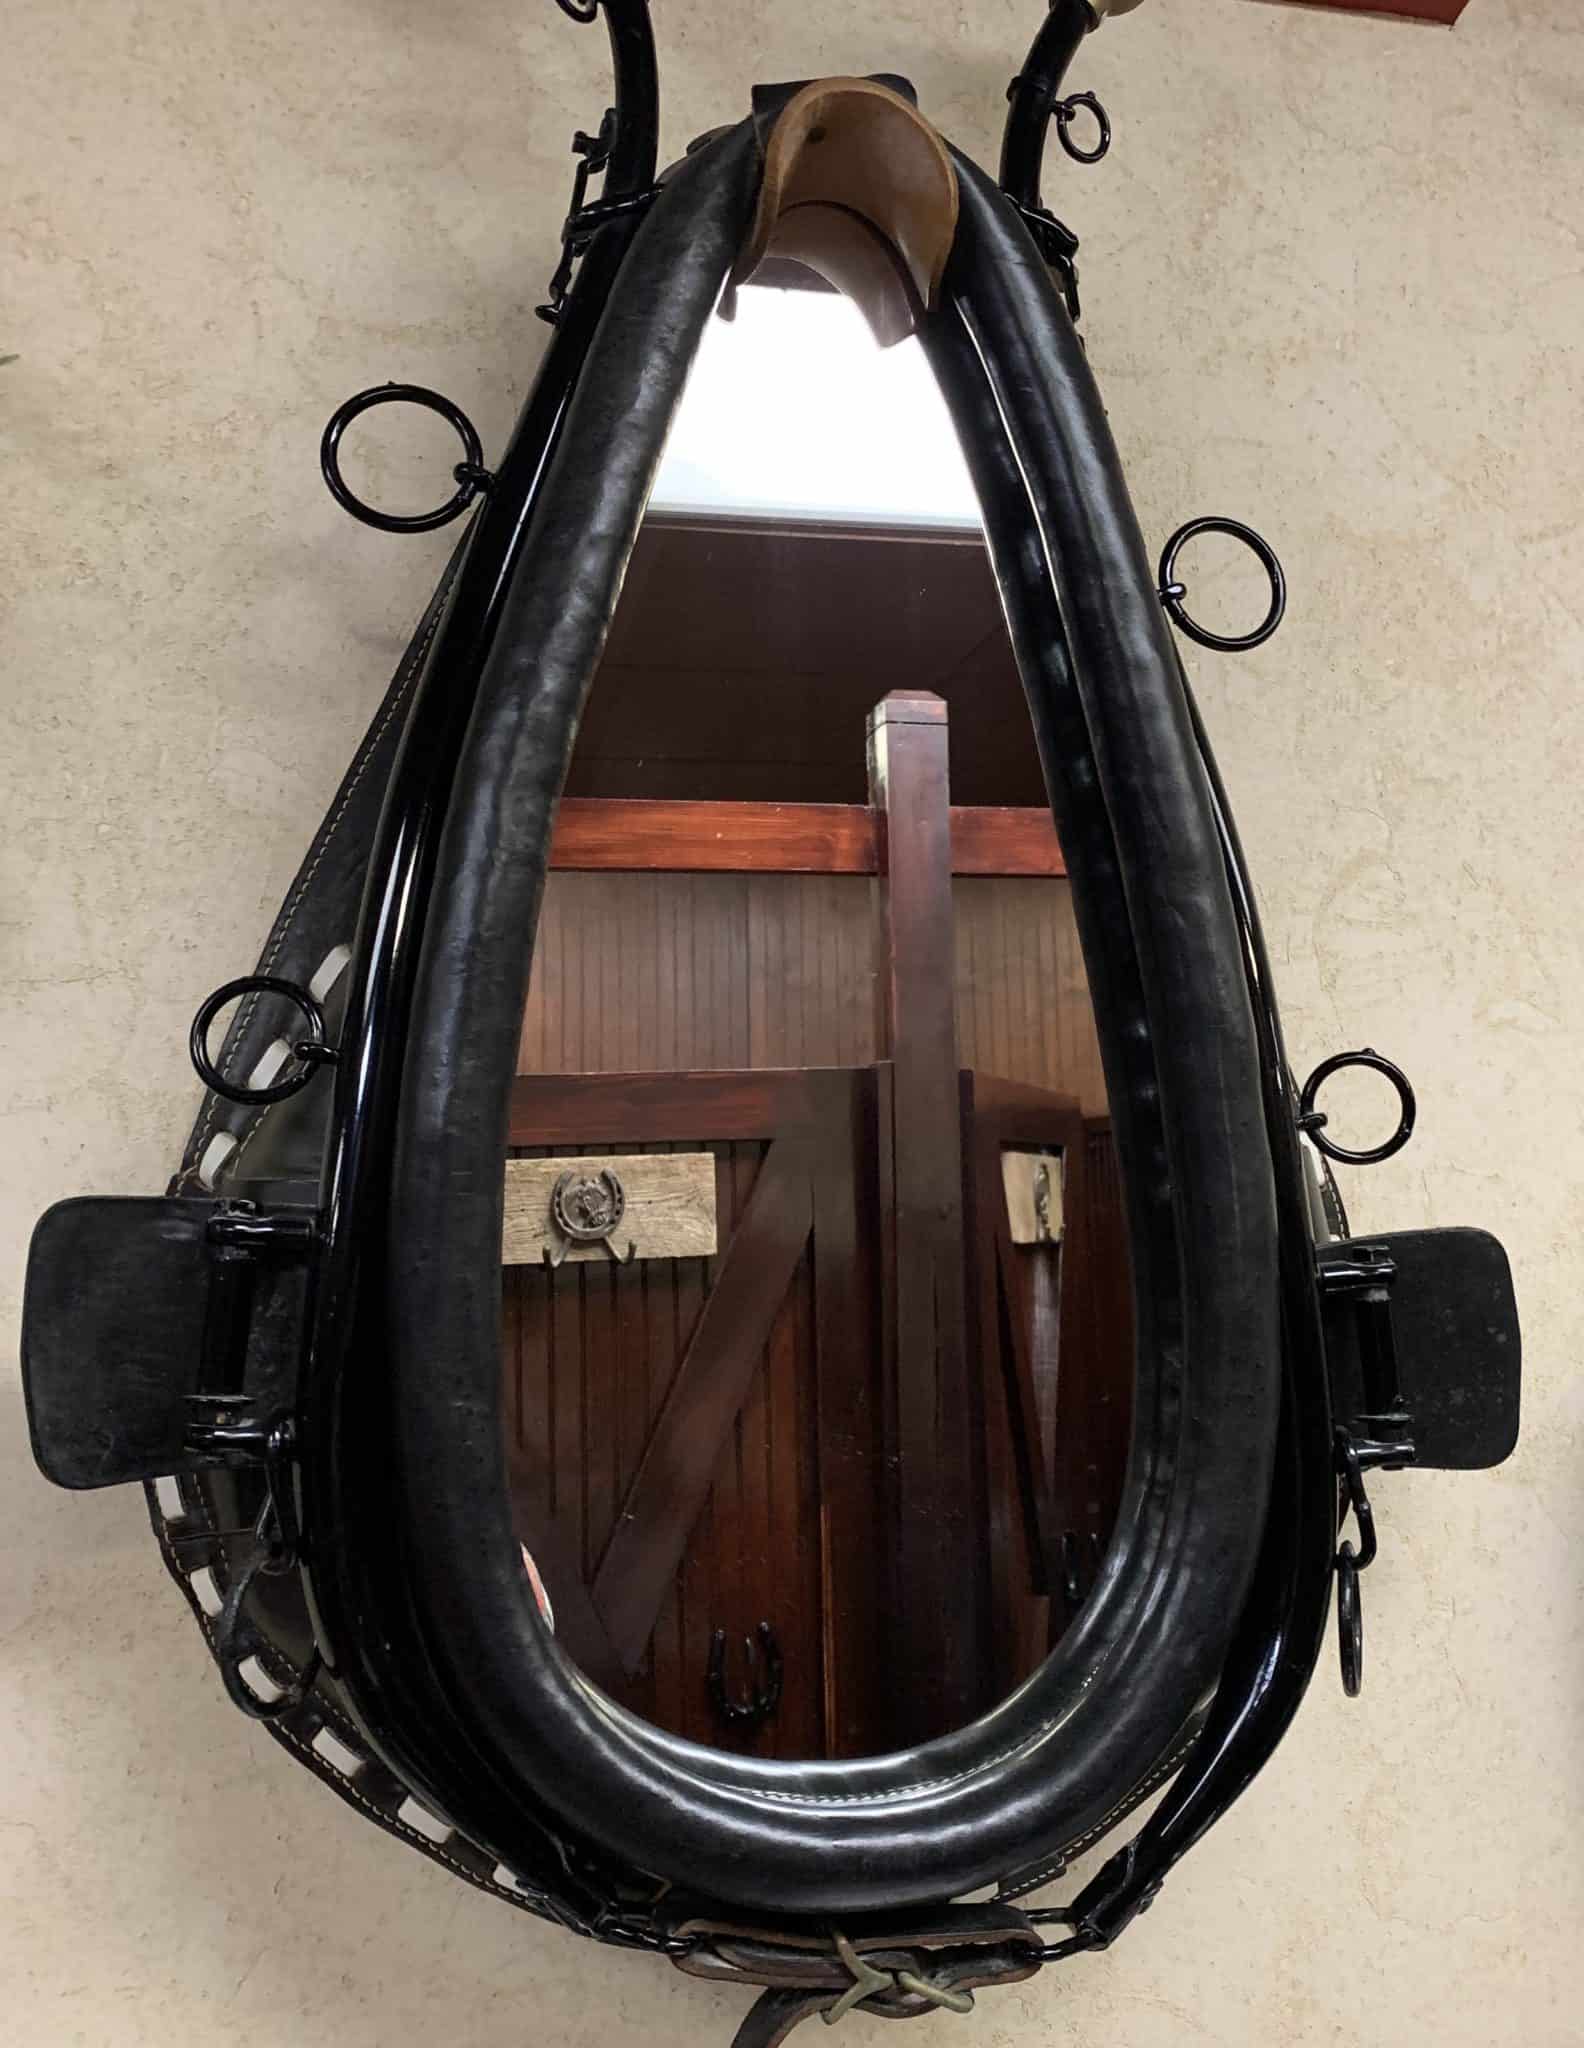 Bathroom Mirror at Dolly Parton's Stampede Dinner Attraction - Horse Harness